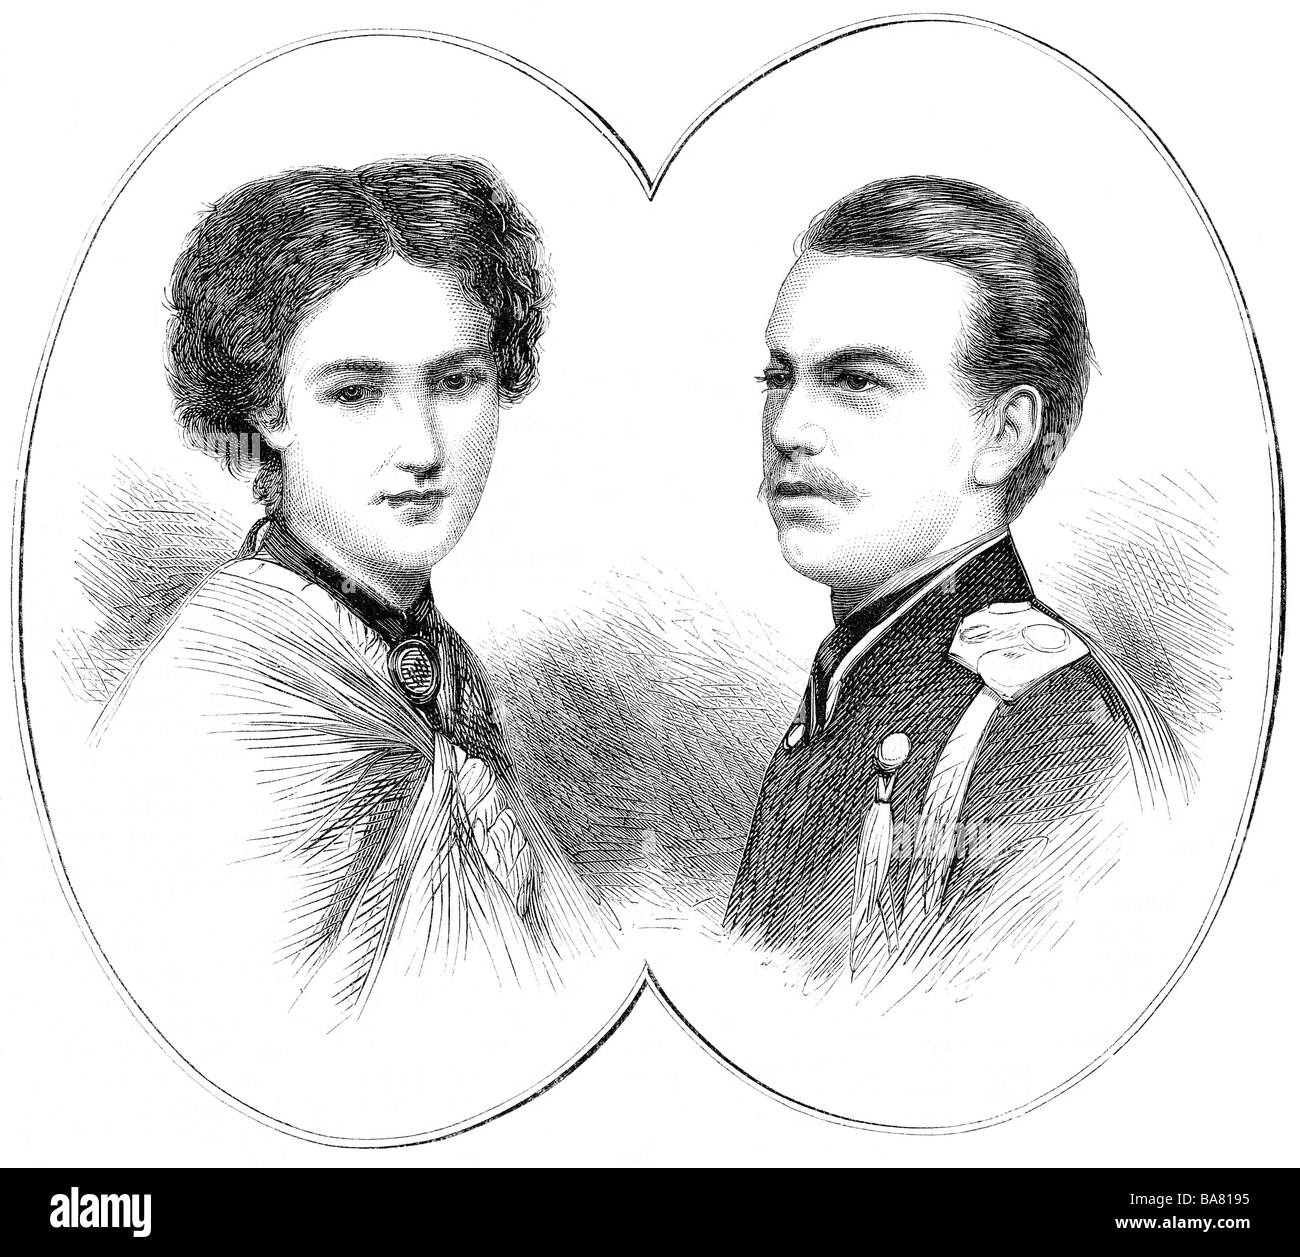 Alexander III Alexandrovich, 10.3.1845 - 1.11.1894, Emperor of Russia 1.3.1881 - 1.11.1894, with wife Maria Feodorovna, wood engraving, 1866, , Stock Photo